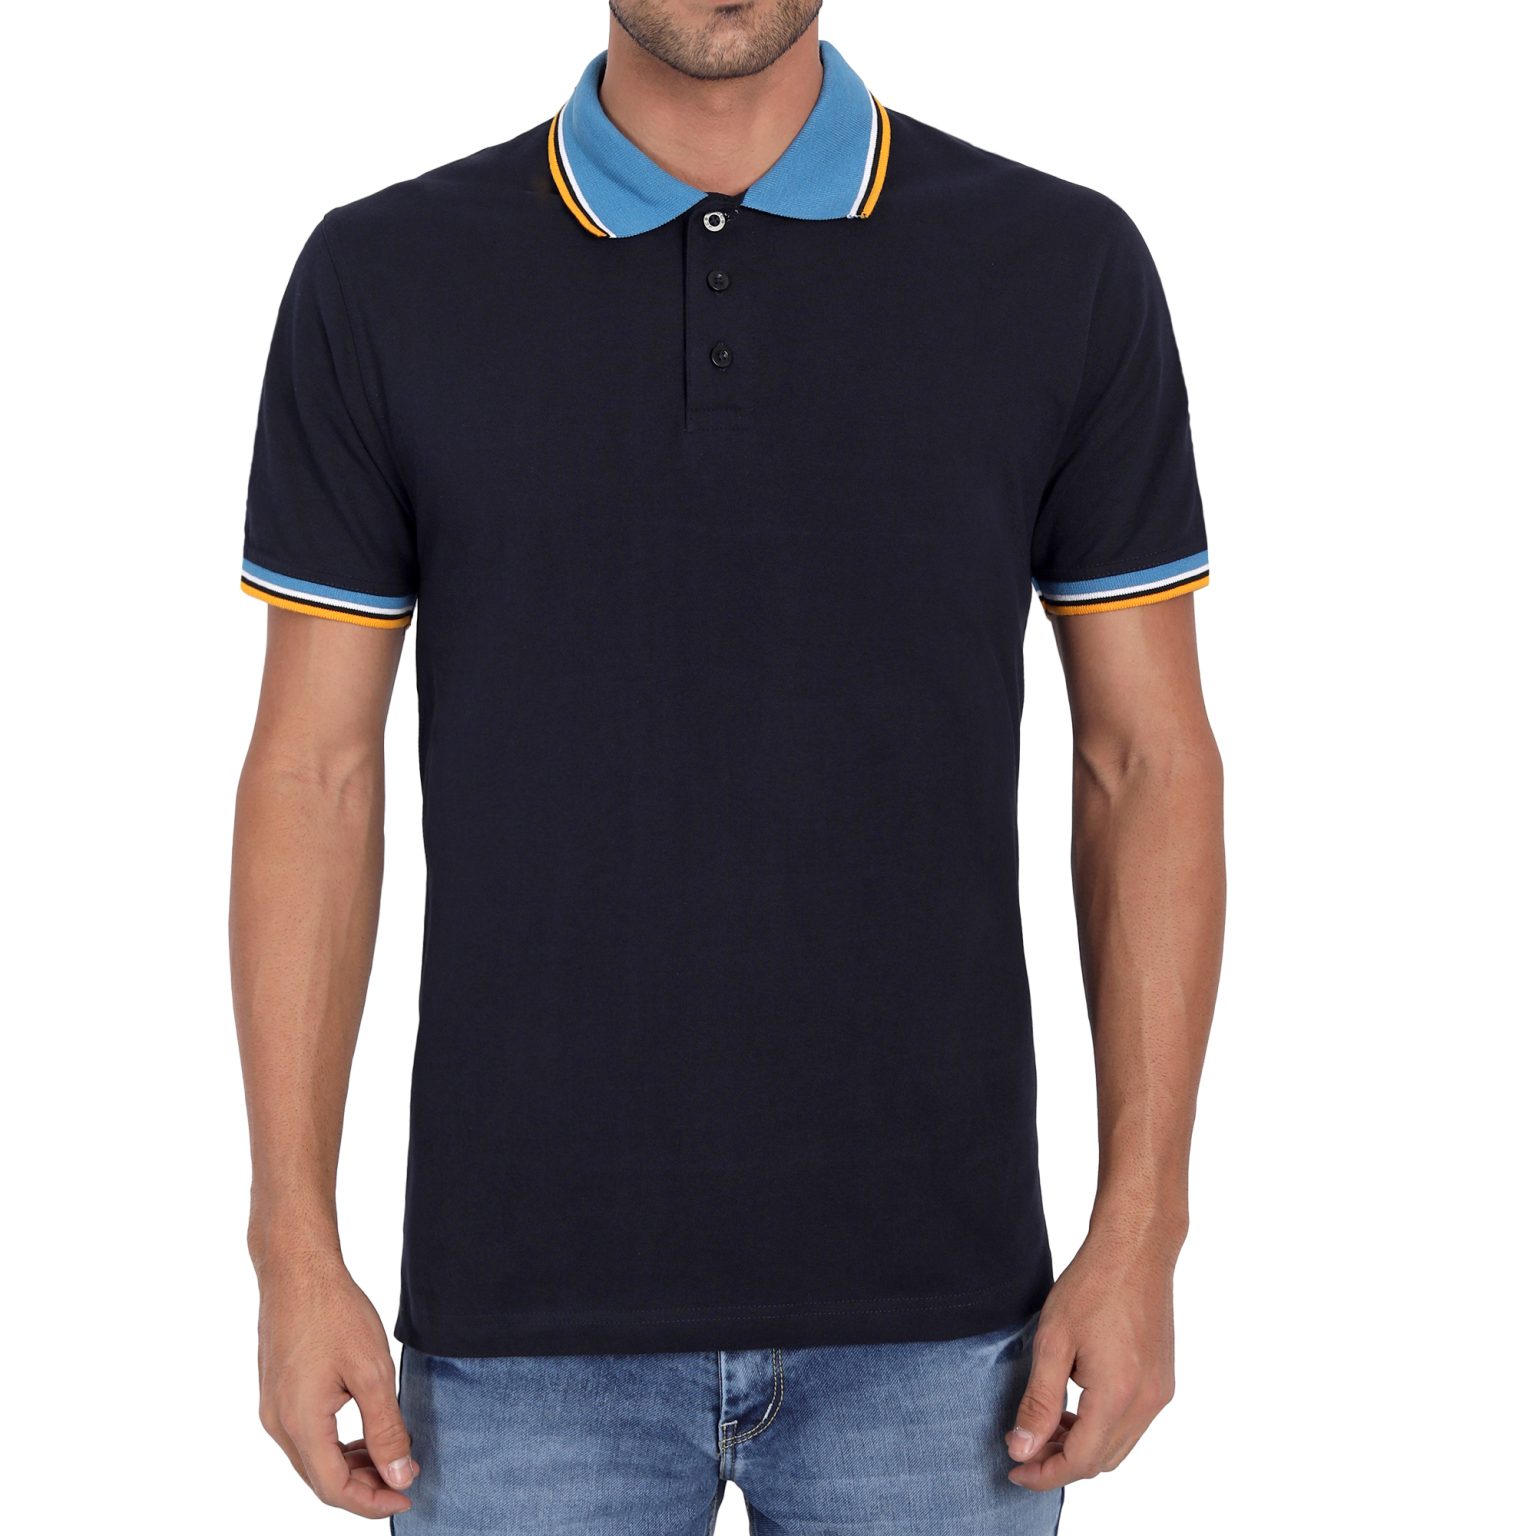 JCB Blue Polo T-shirt – Welcome to the JCB merchandise shop India website